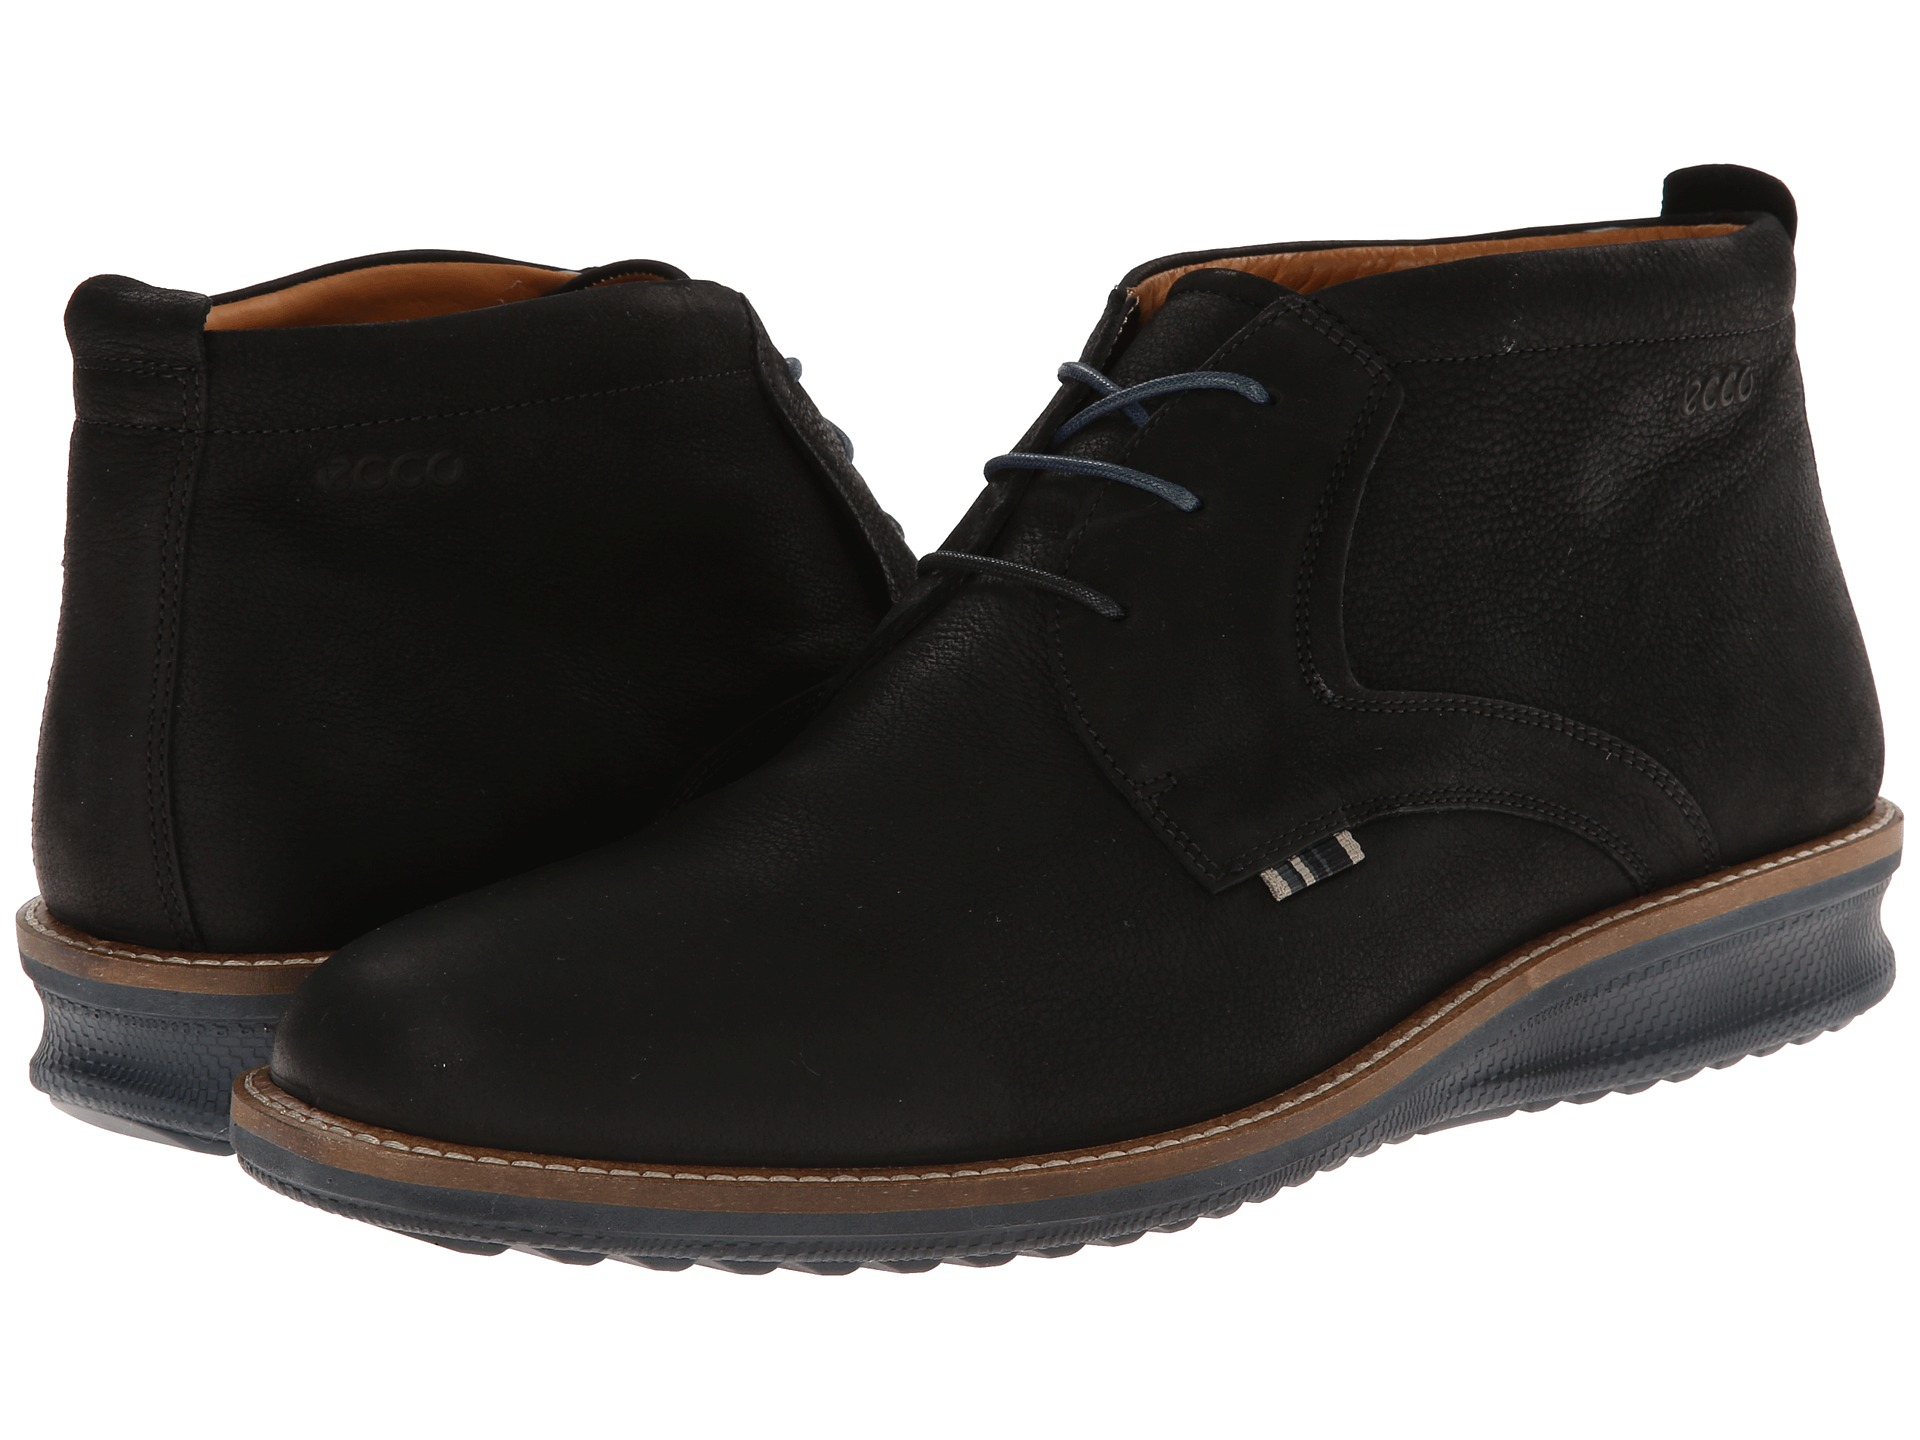 Lyst - Ecco Contoured Low Cut Boot in Black for Men